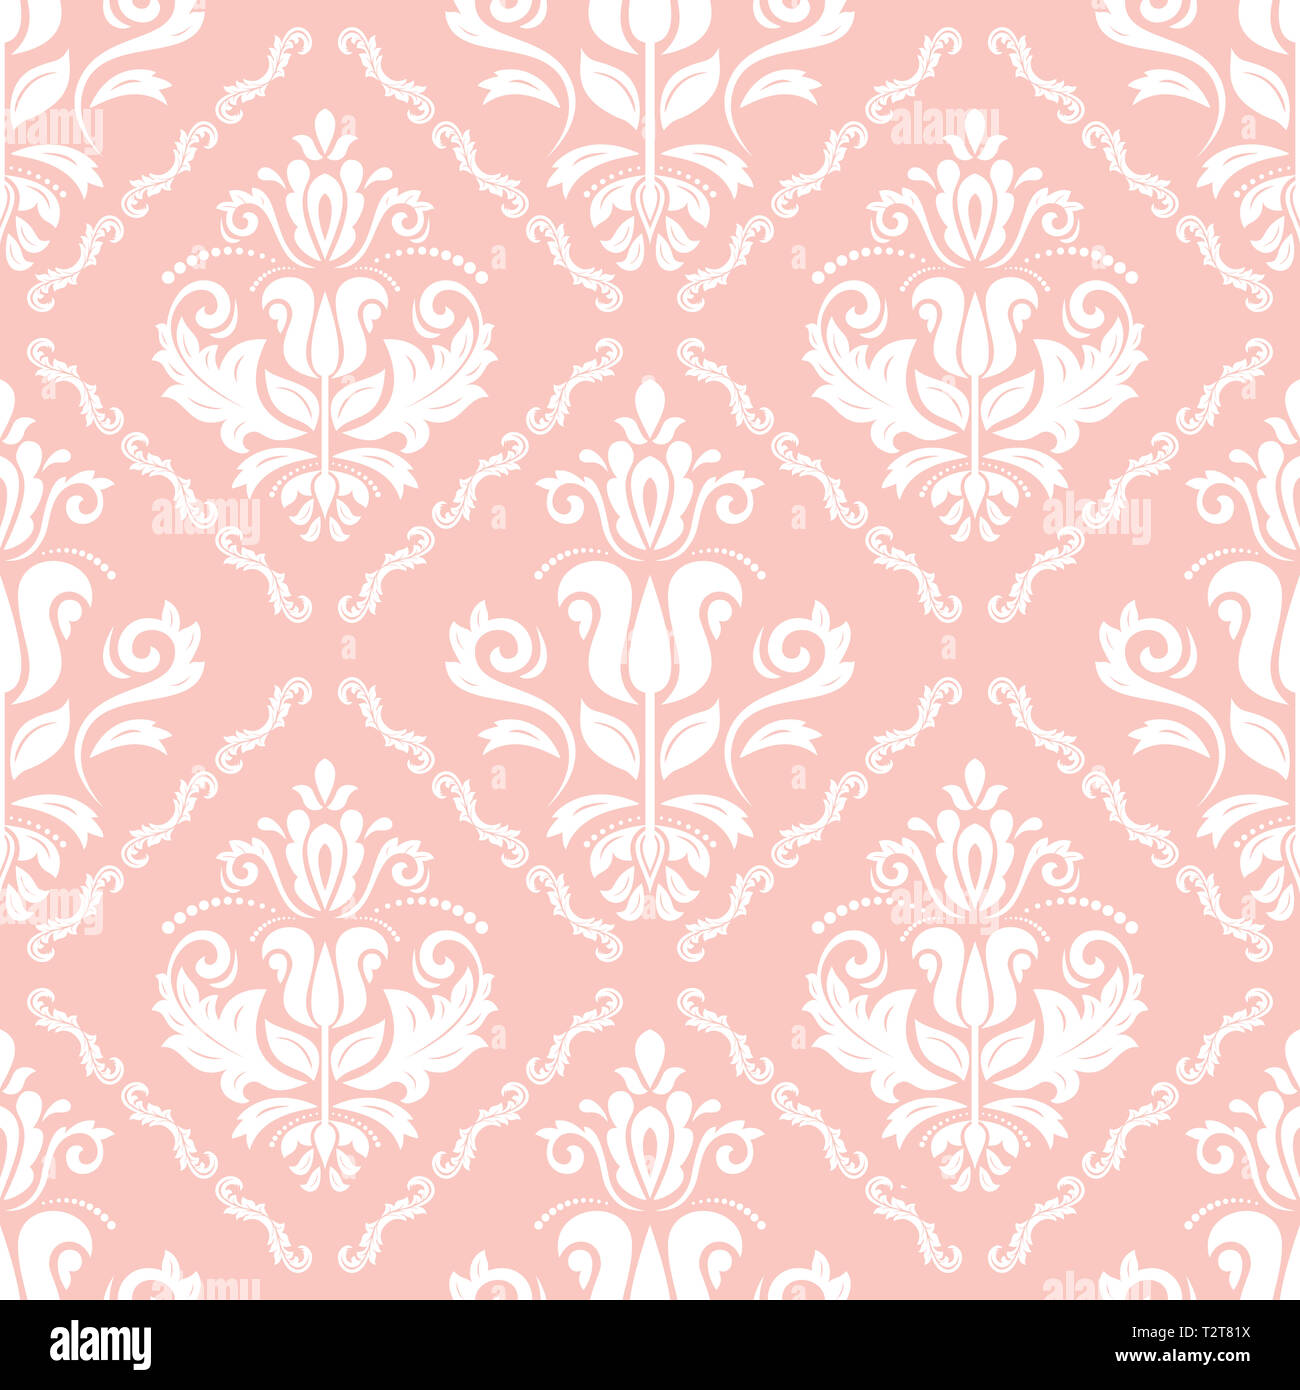 Melissa Classic Damask Wall Paper Beige Pink Metallic YG31303  Wall  Finishing Wallpapers  Buy Melissa Classic Damask Wall Paper Beige Pink  Metallic YG31303 Online at Low Price Only on BuildNextin  BuildNext